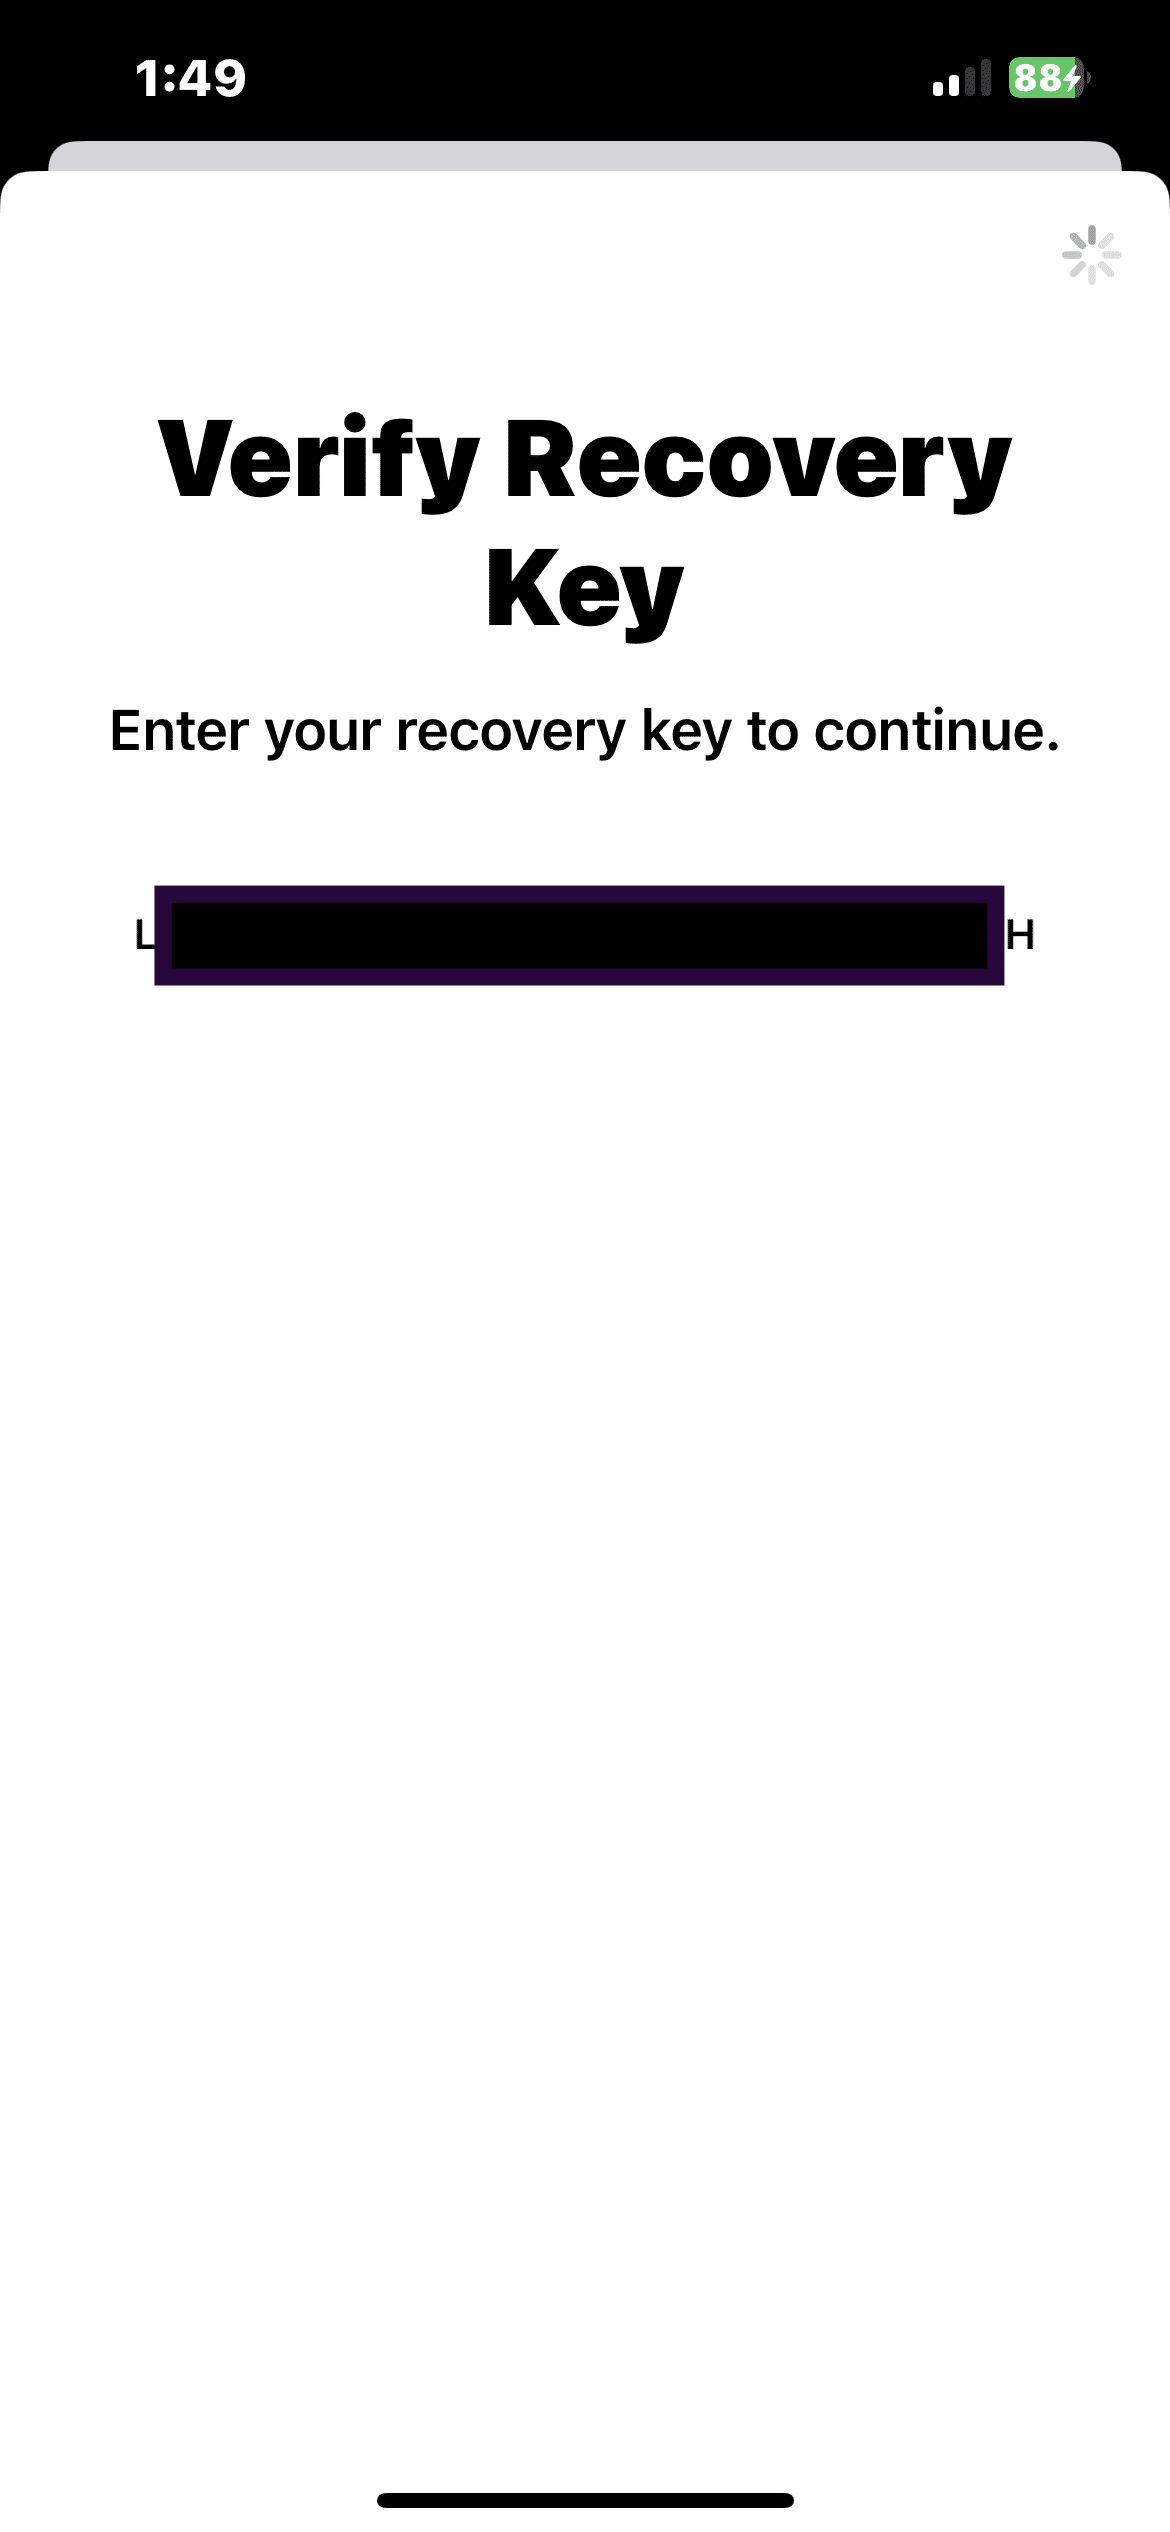 Enter your recovery key. 